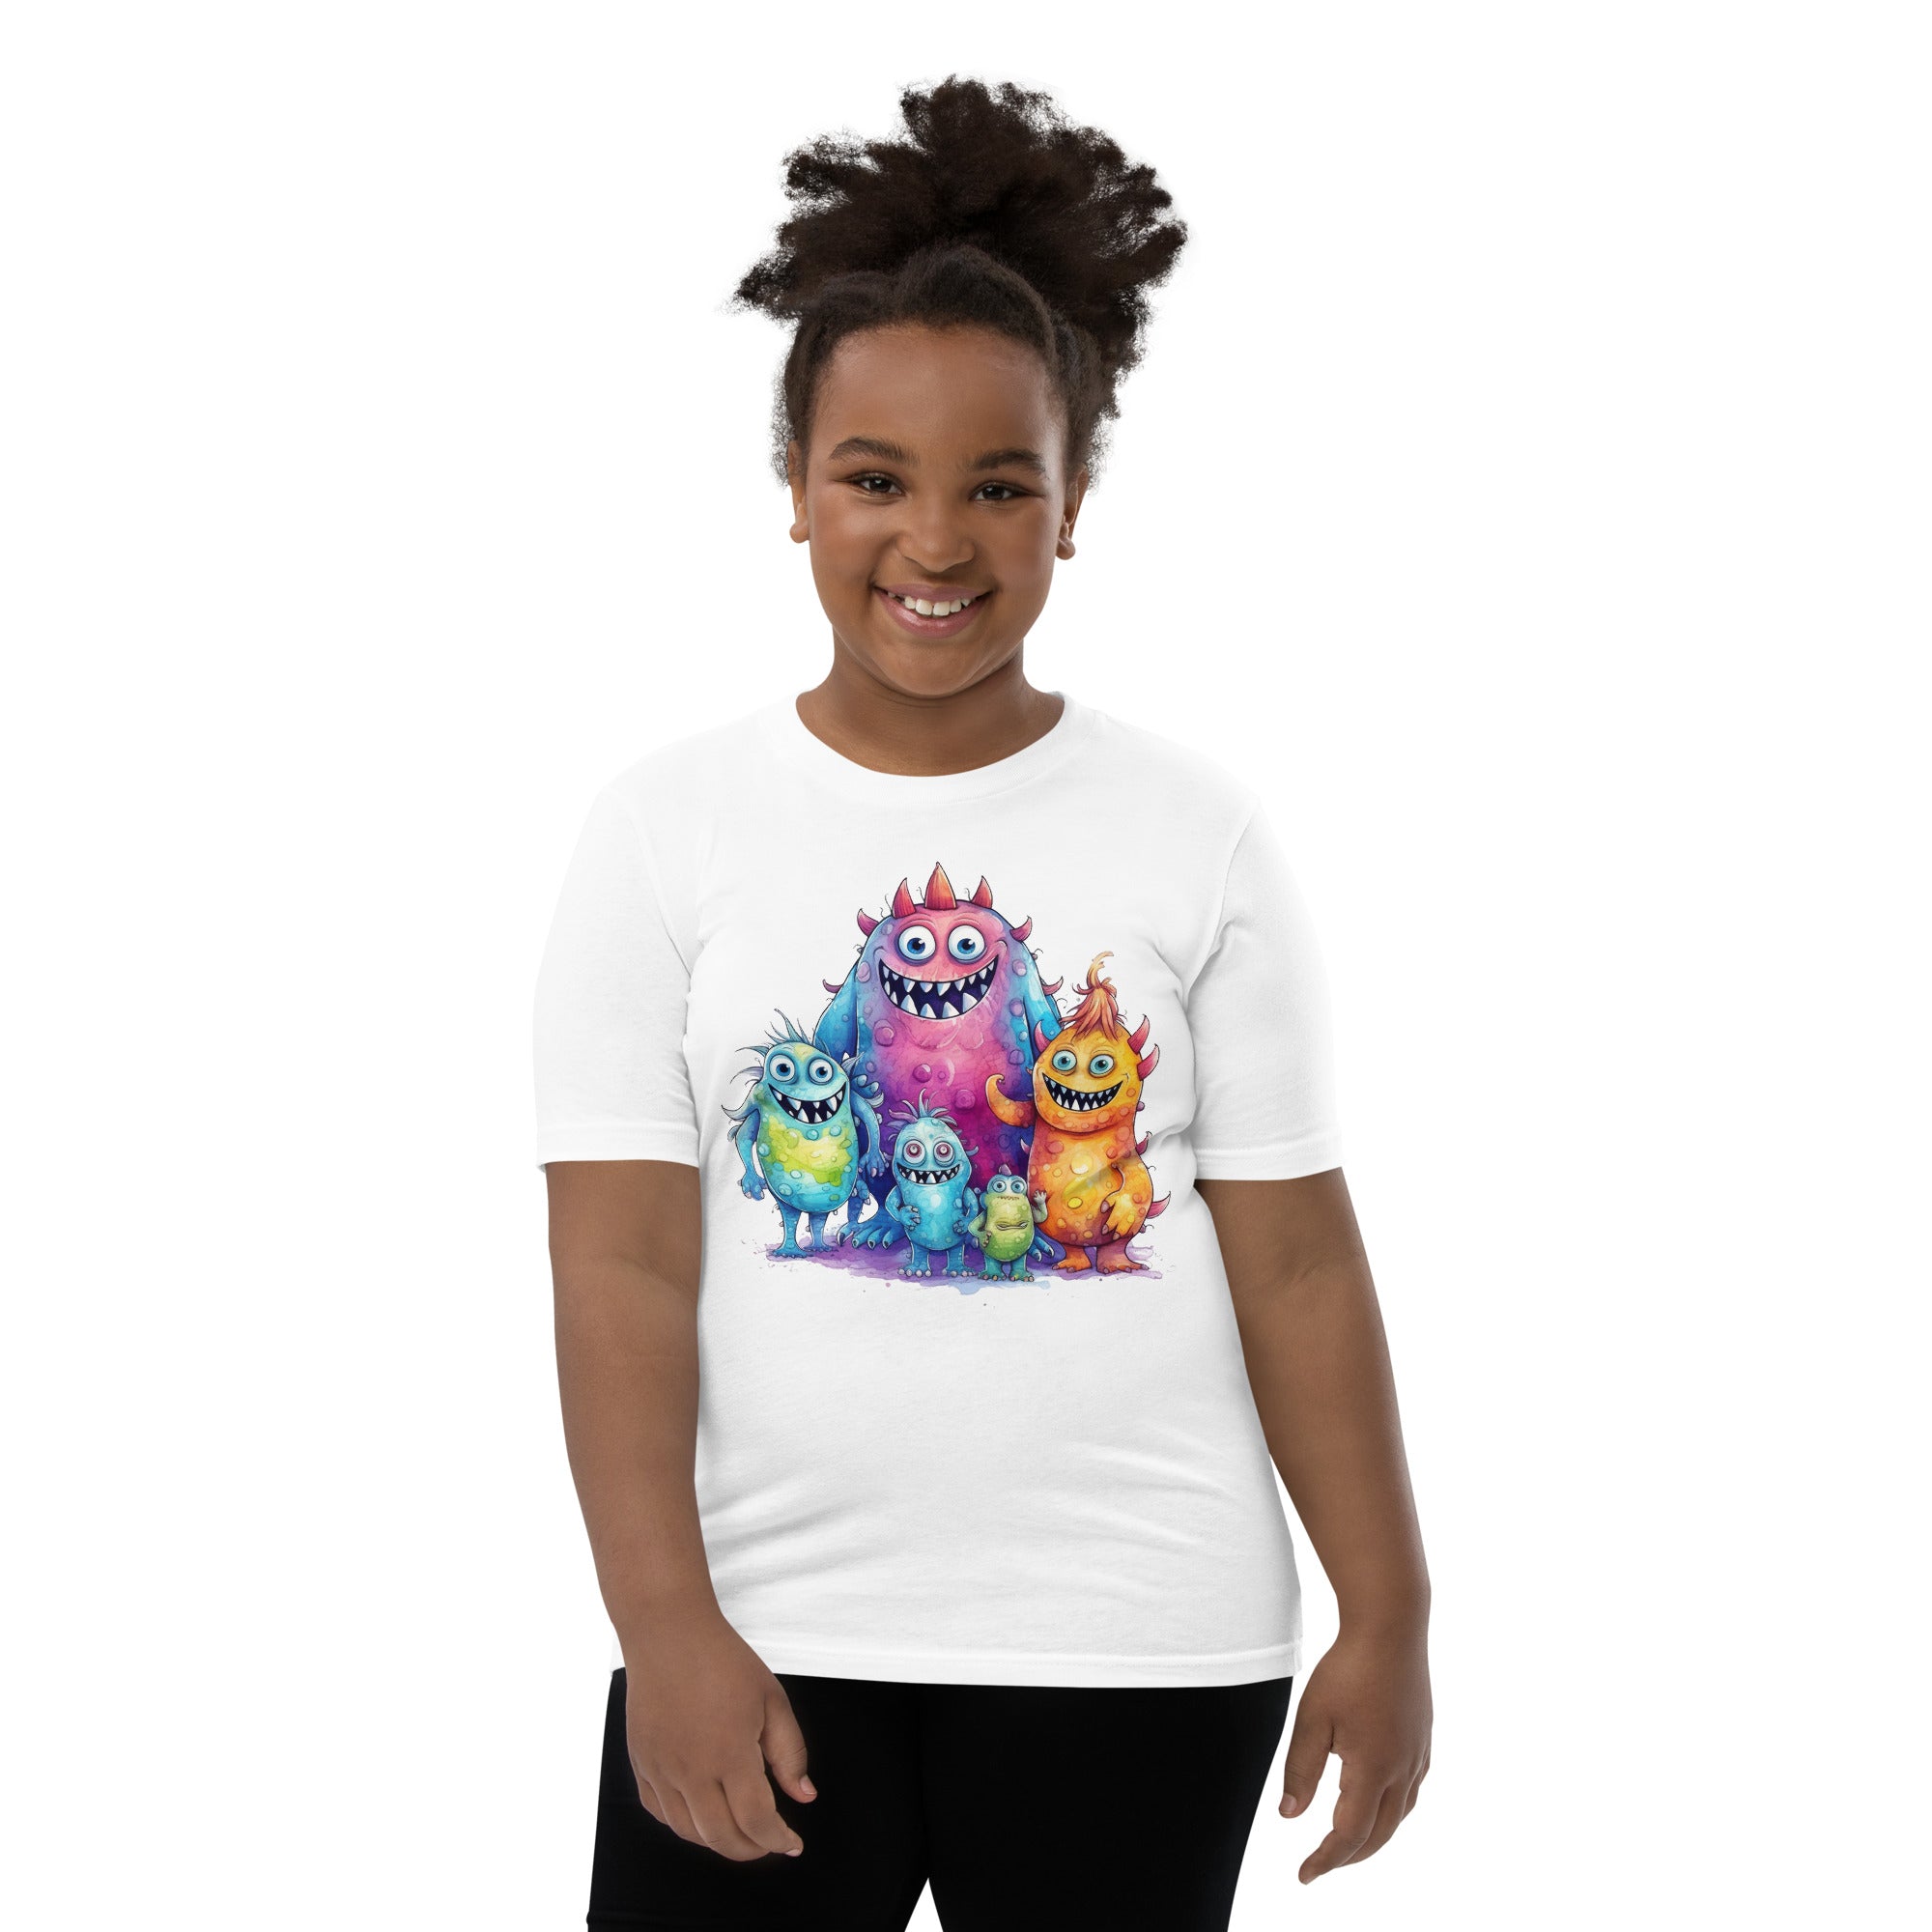 Youth Short Sleeve T-Shirt, Monster family, back to School T shirt